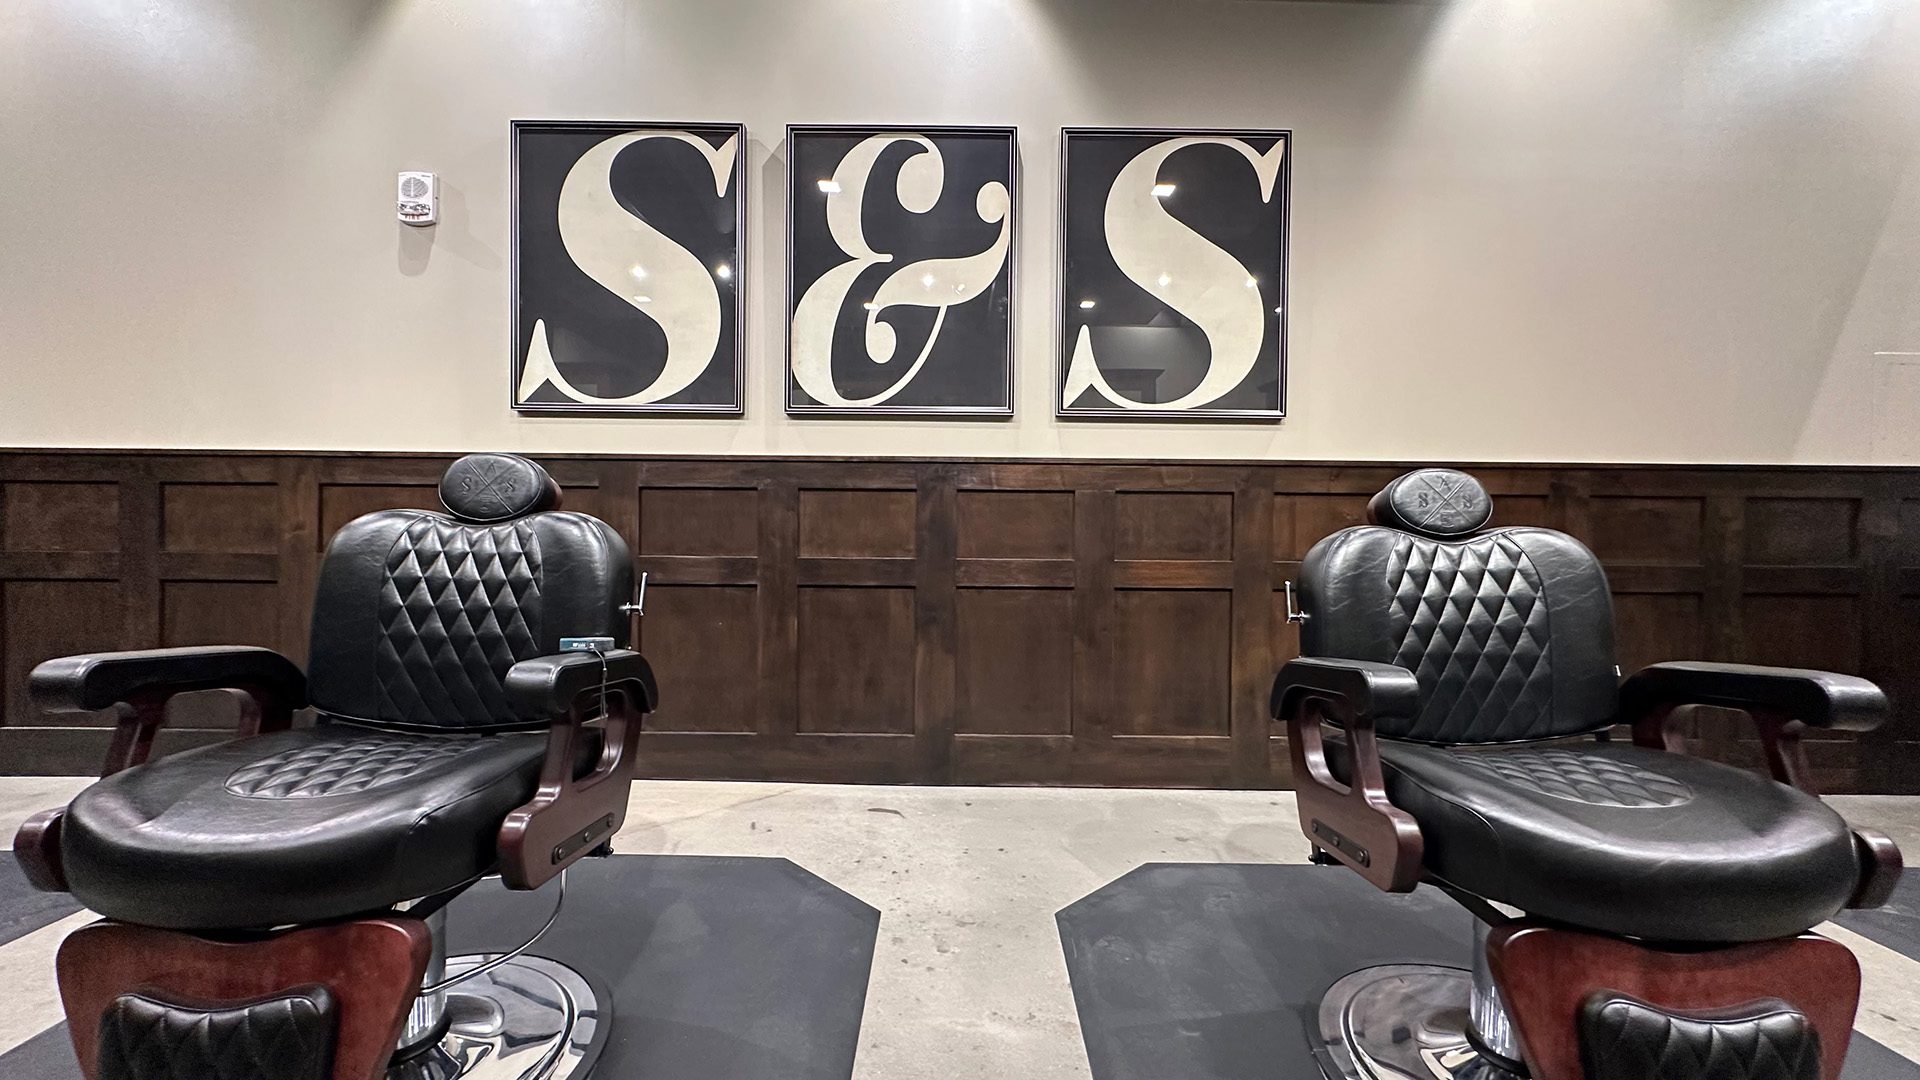 'S&S' art on the wall with wood wainscoting and two leather barber chairs